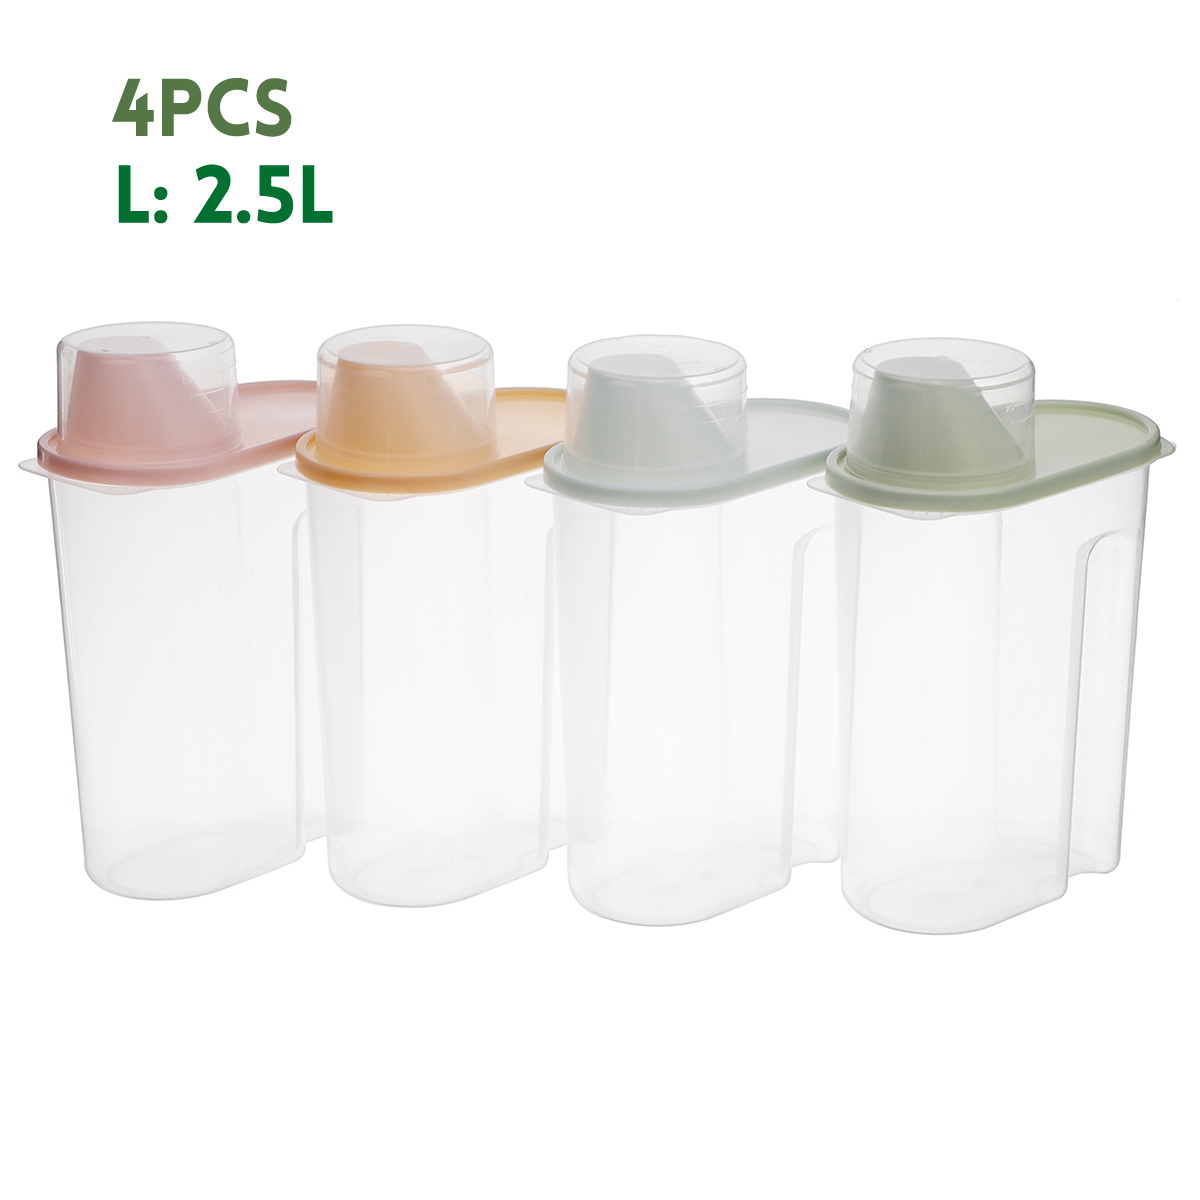 4Pcs-Cereal-Storage-Box-Plastic-Rice-Container-Food-Sealed-Jar-Cans-Kitchen-Grain-Dried-Fruit-Snacks-1730653-10